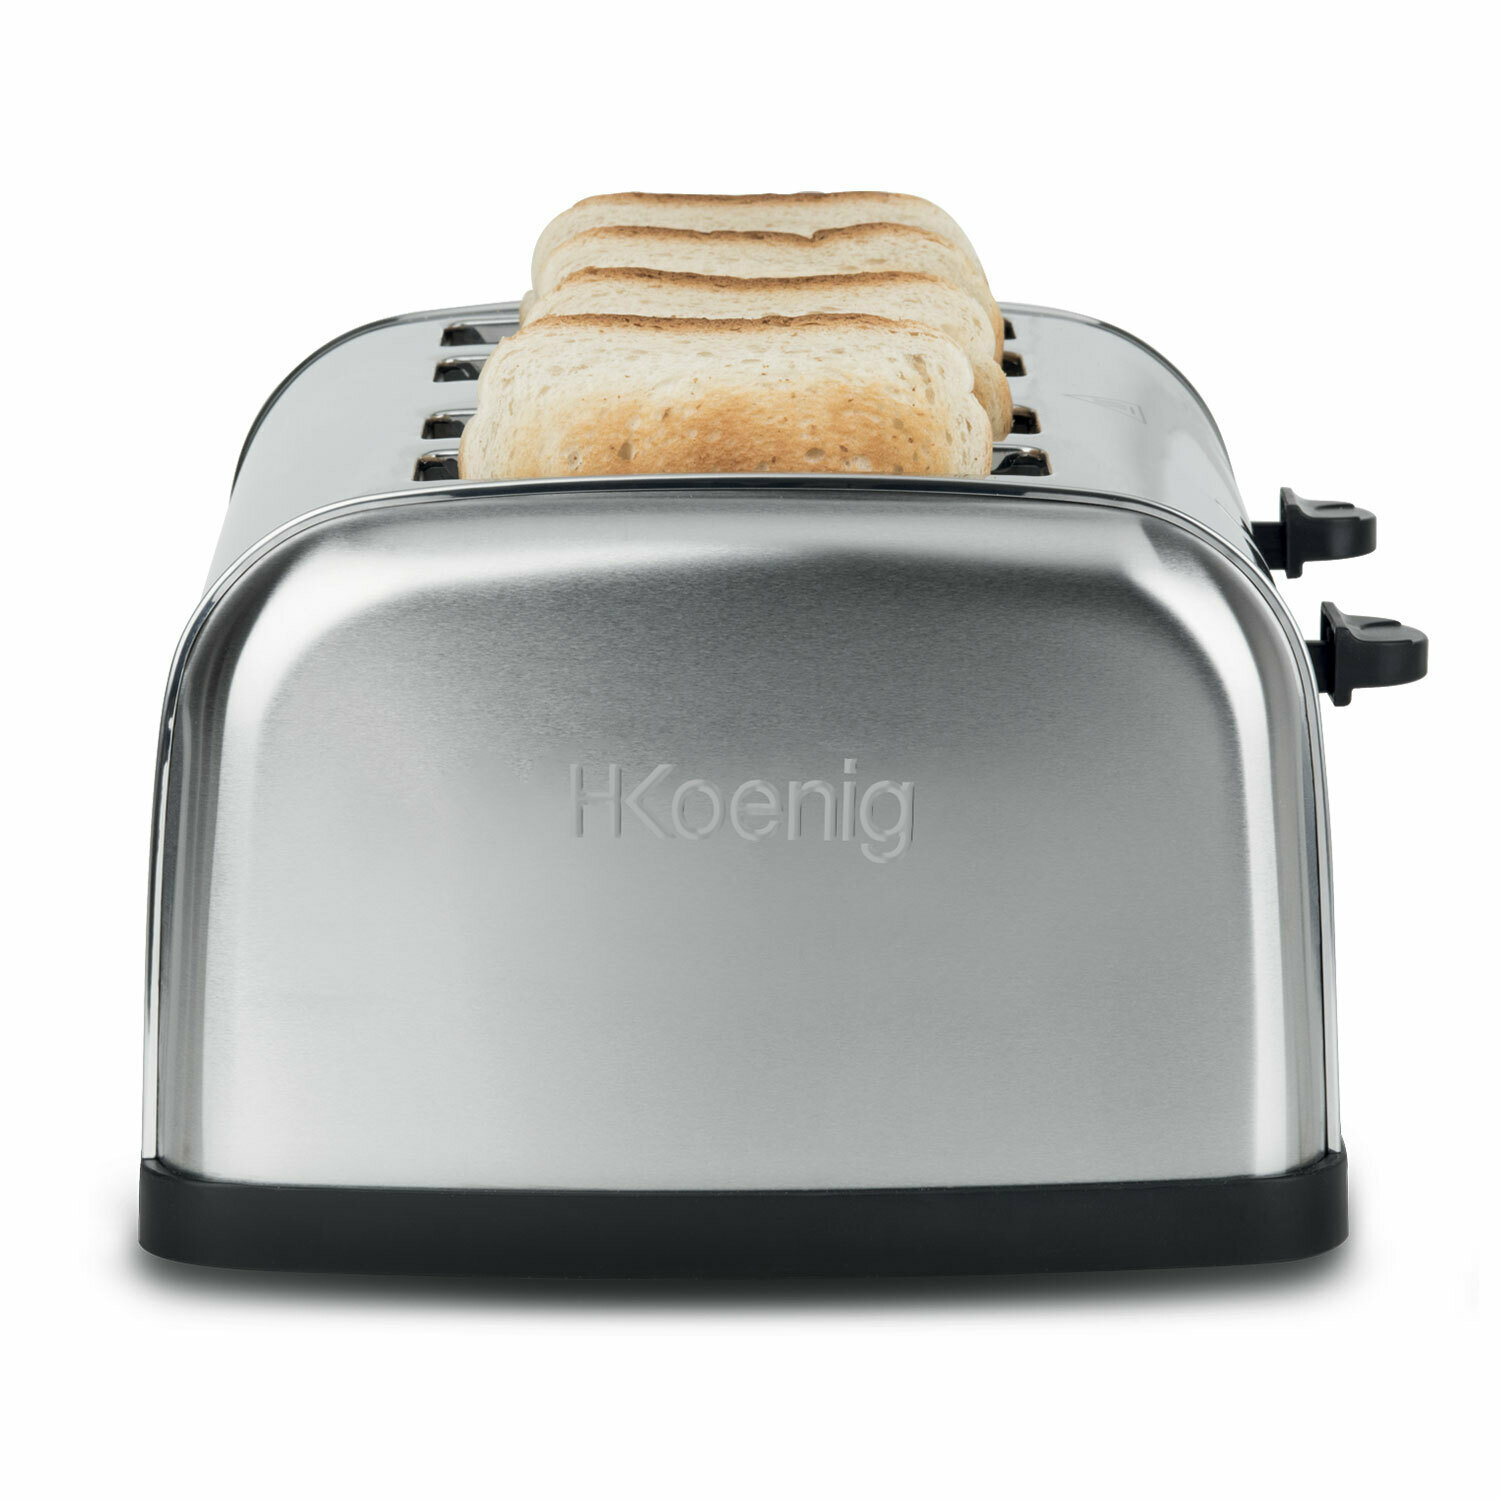 grille-pain toaster 4 tranches